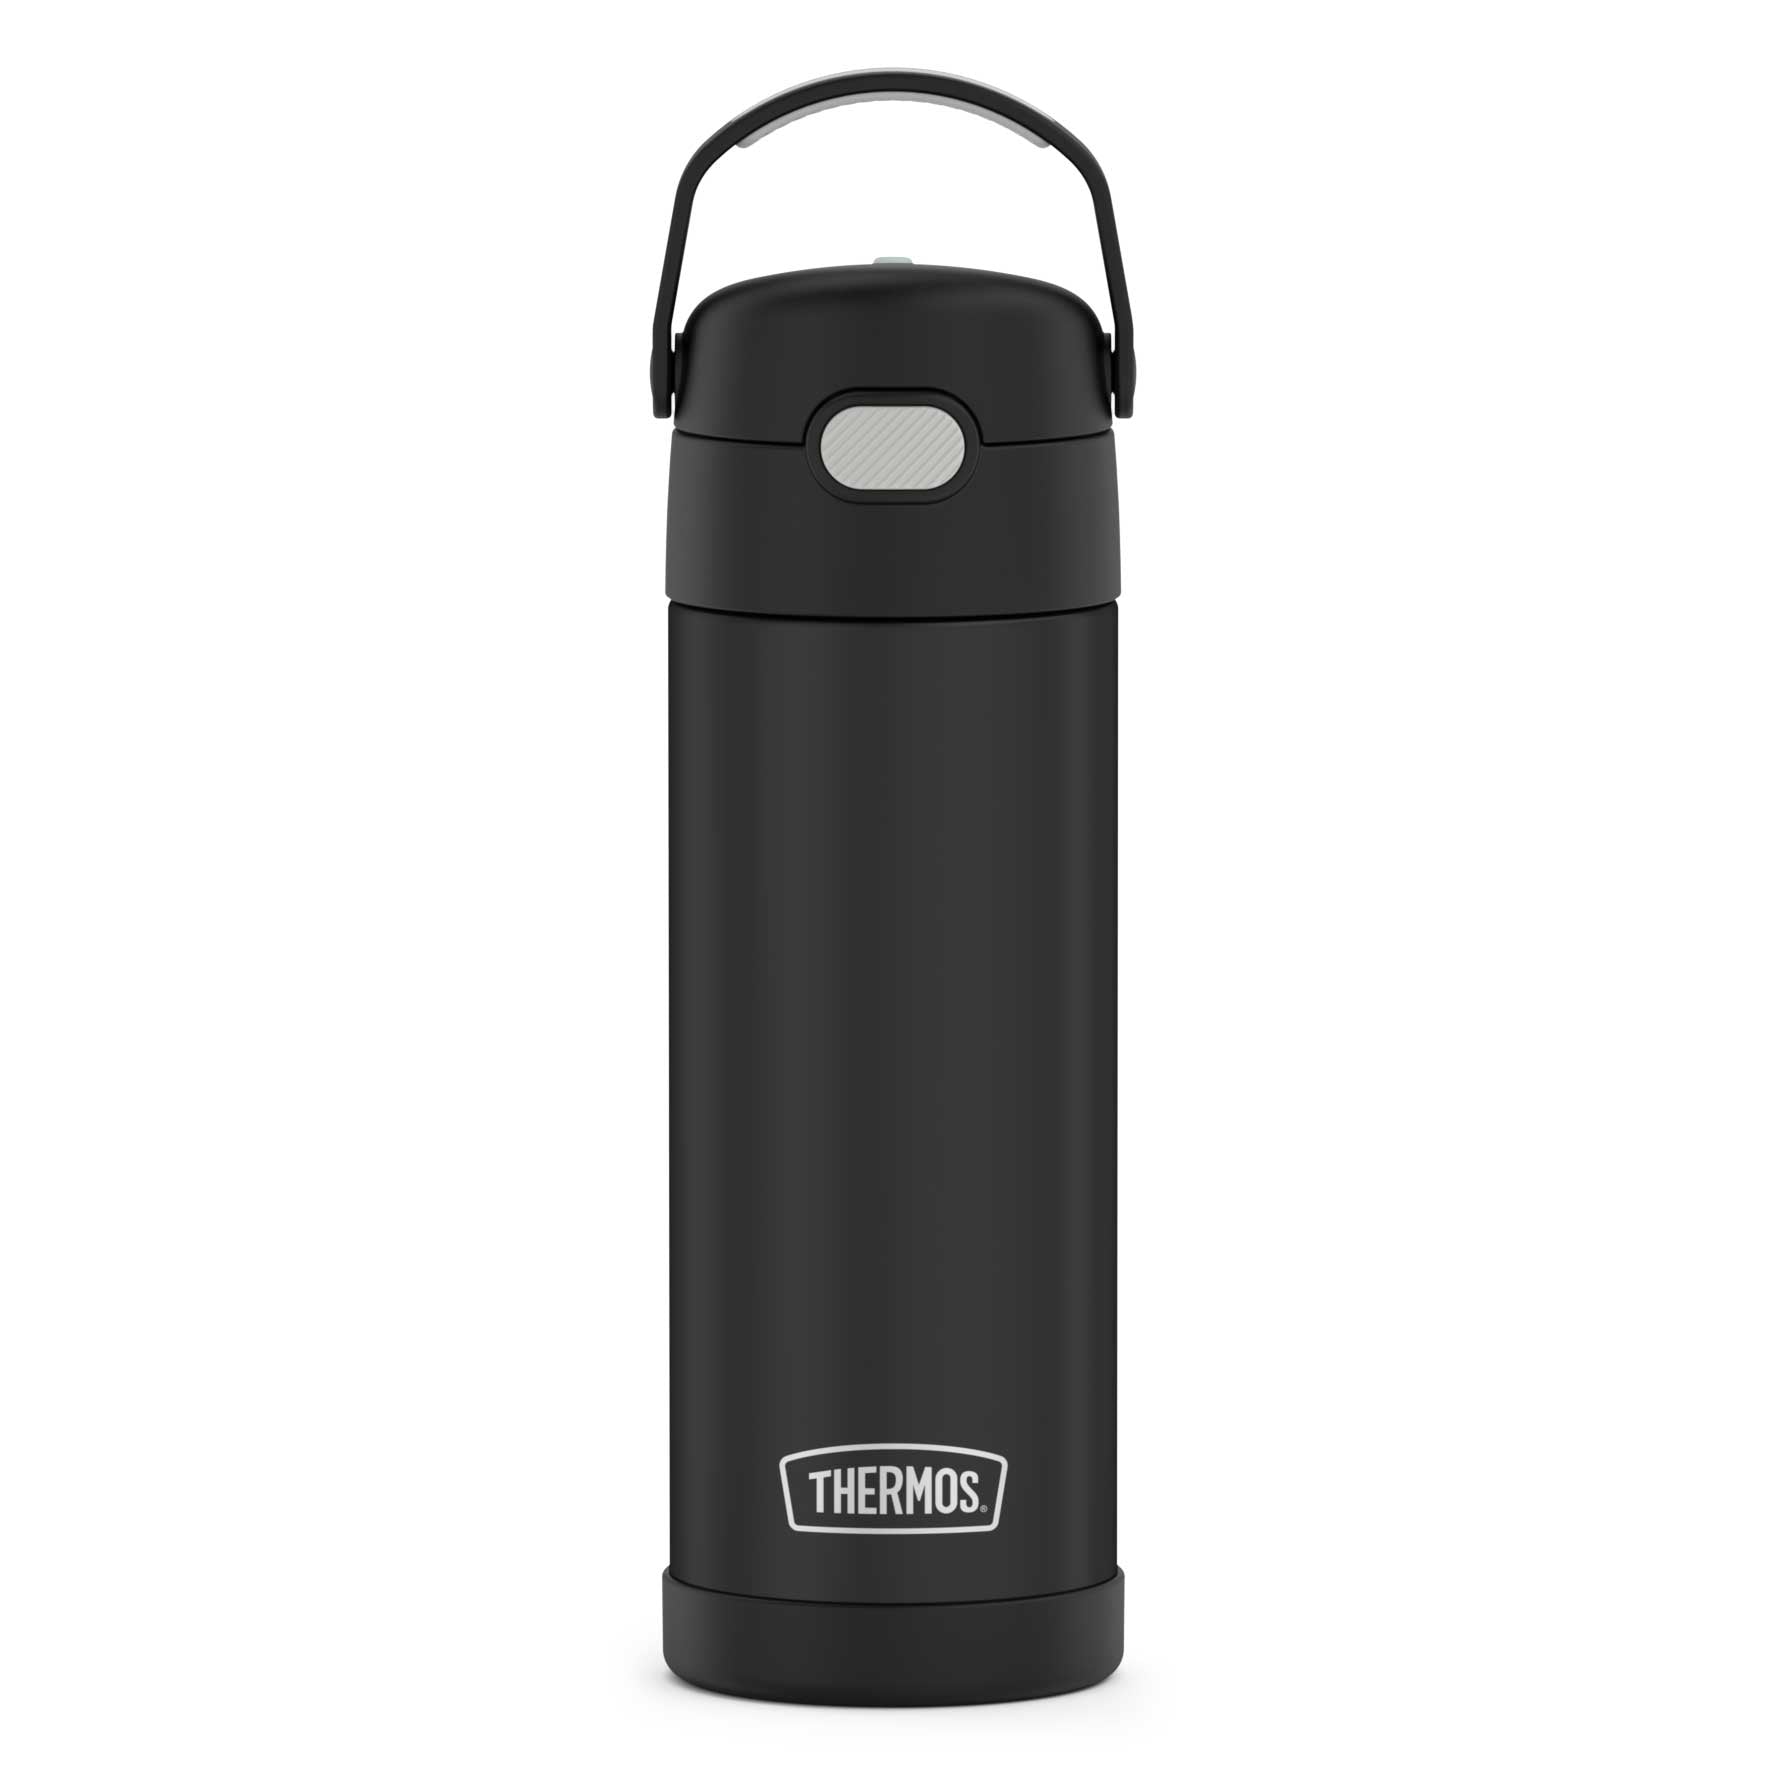 Vacuum Kids Thermos OEM ODM Product Catalog Information